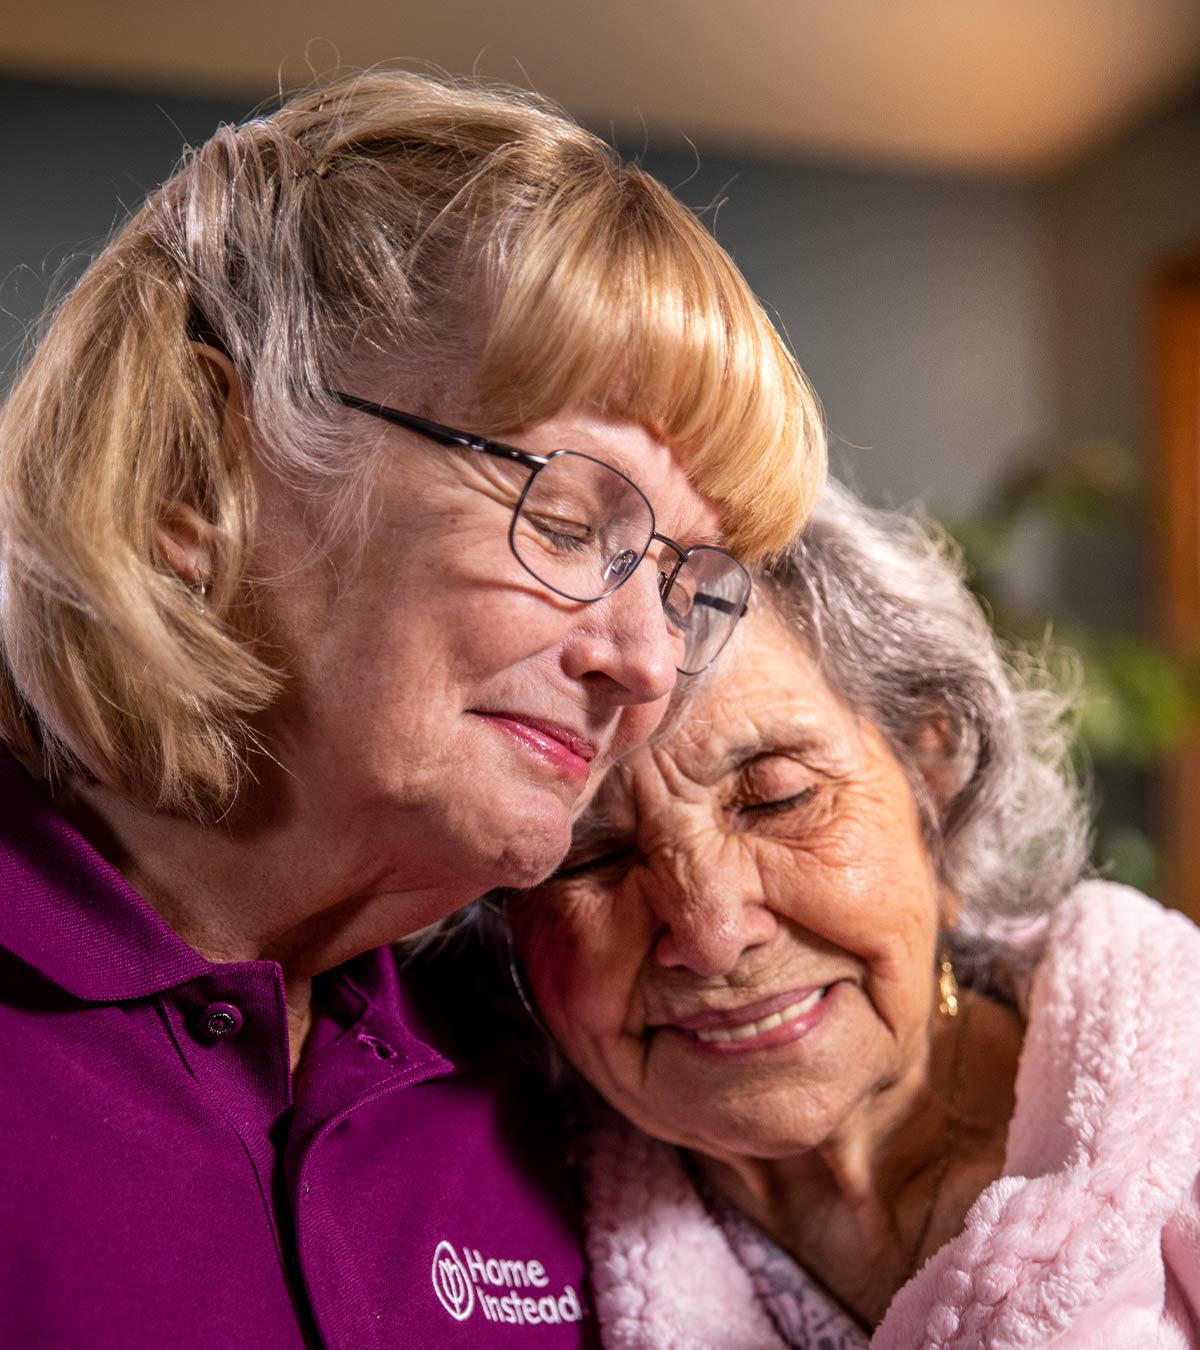 CAREGiver providing in-home senior care services. Home Instead of Surprise, AZ provides Elder Care to aging adults. 